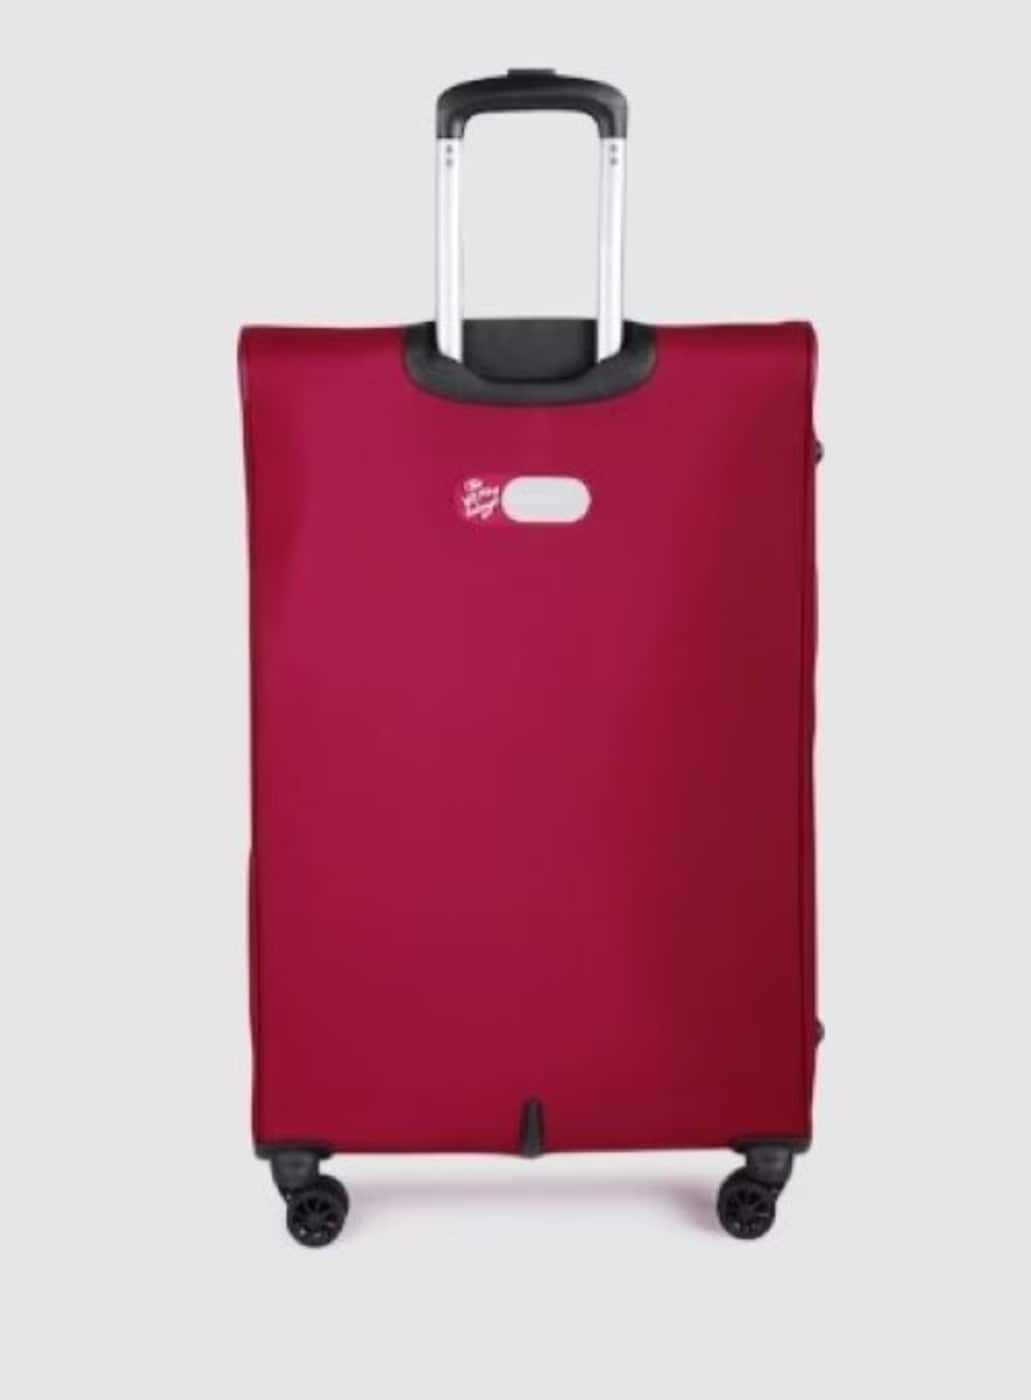 Buy STUNNERZ Medium Check-in Luggage trolley Bags Travel bags Suitcase|24  inch|61cm|Maroon| Online at Best Prices in India - JioMart.